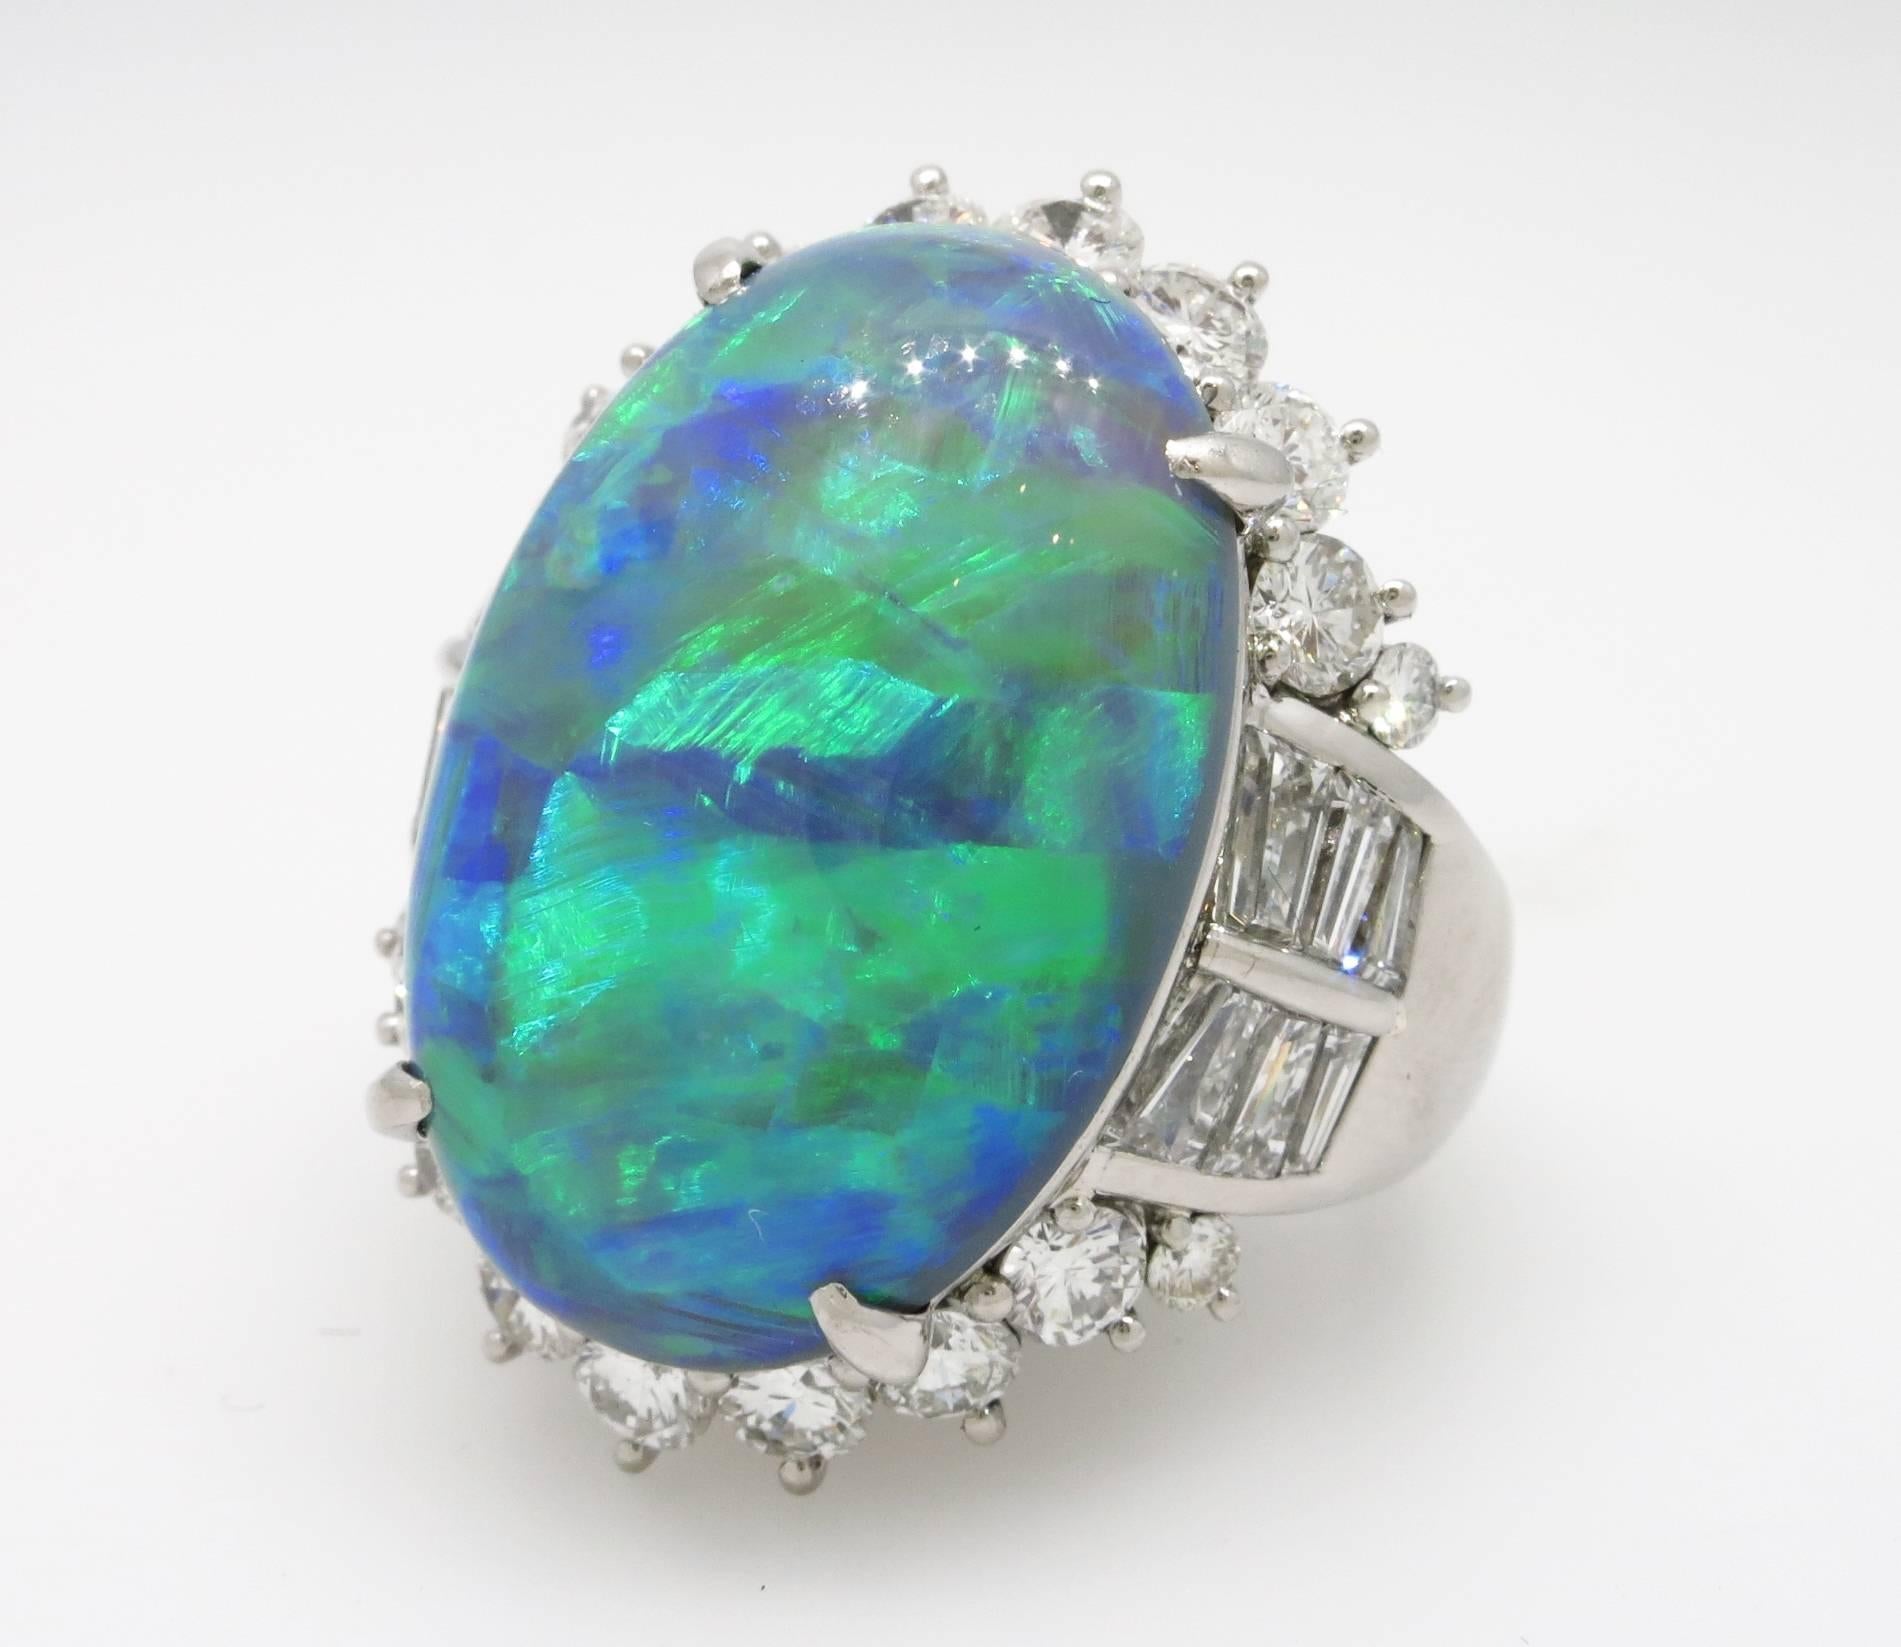 Ring features a beautiful 14.91 ct oval shaped black opal cabochon in the center with flashes of green, yellow, and blue, with dark grey background, surrounded by 3.11 cts of round and baguette diamonds, H color and VS-SI1 clarity.  Set in Platinum.